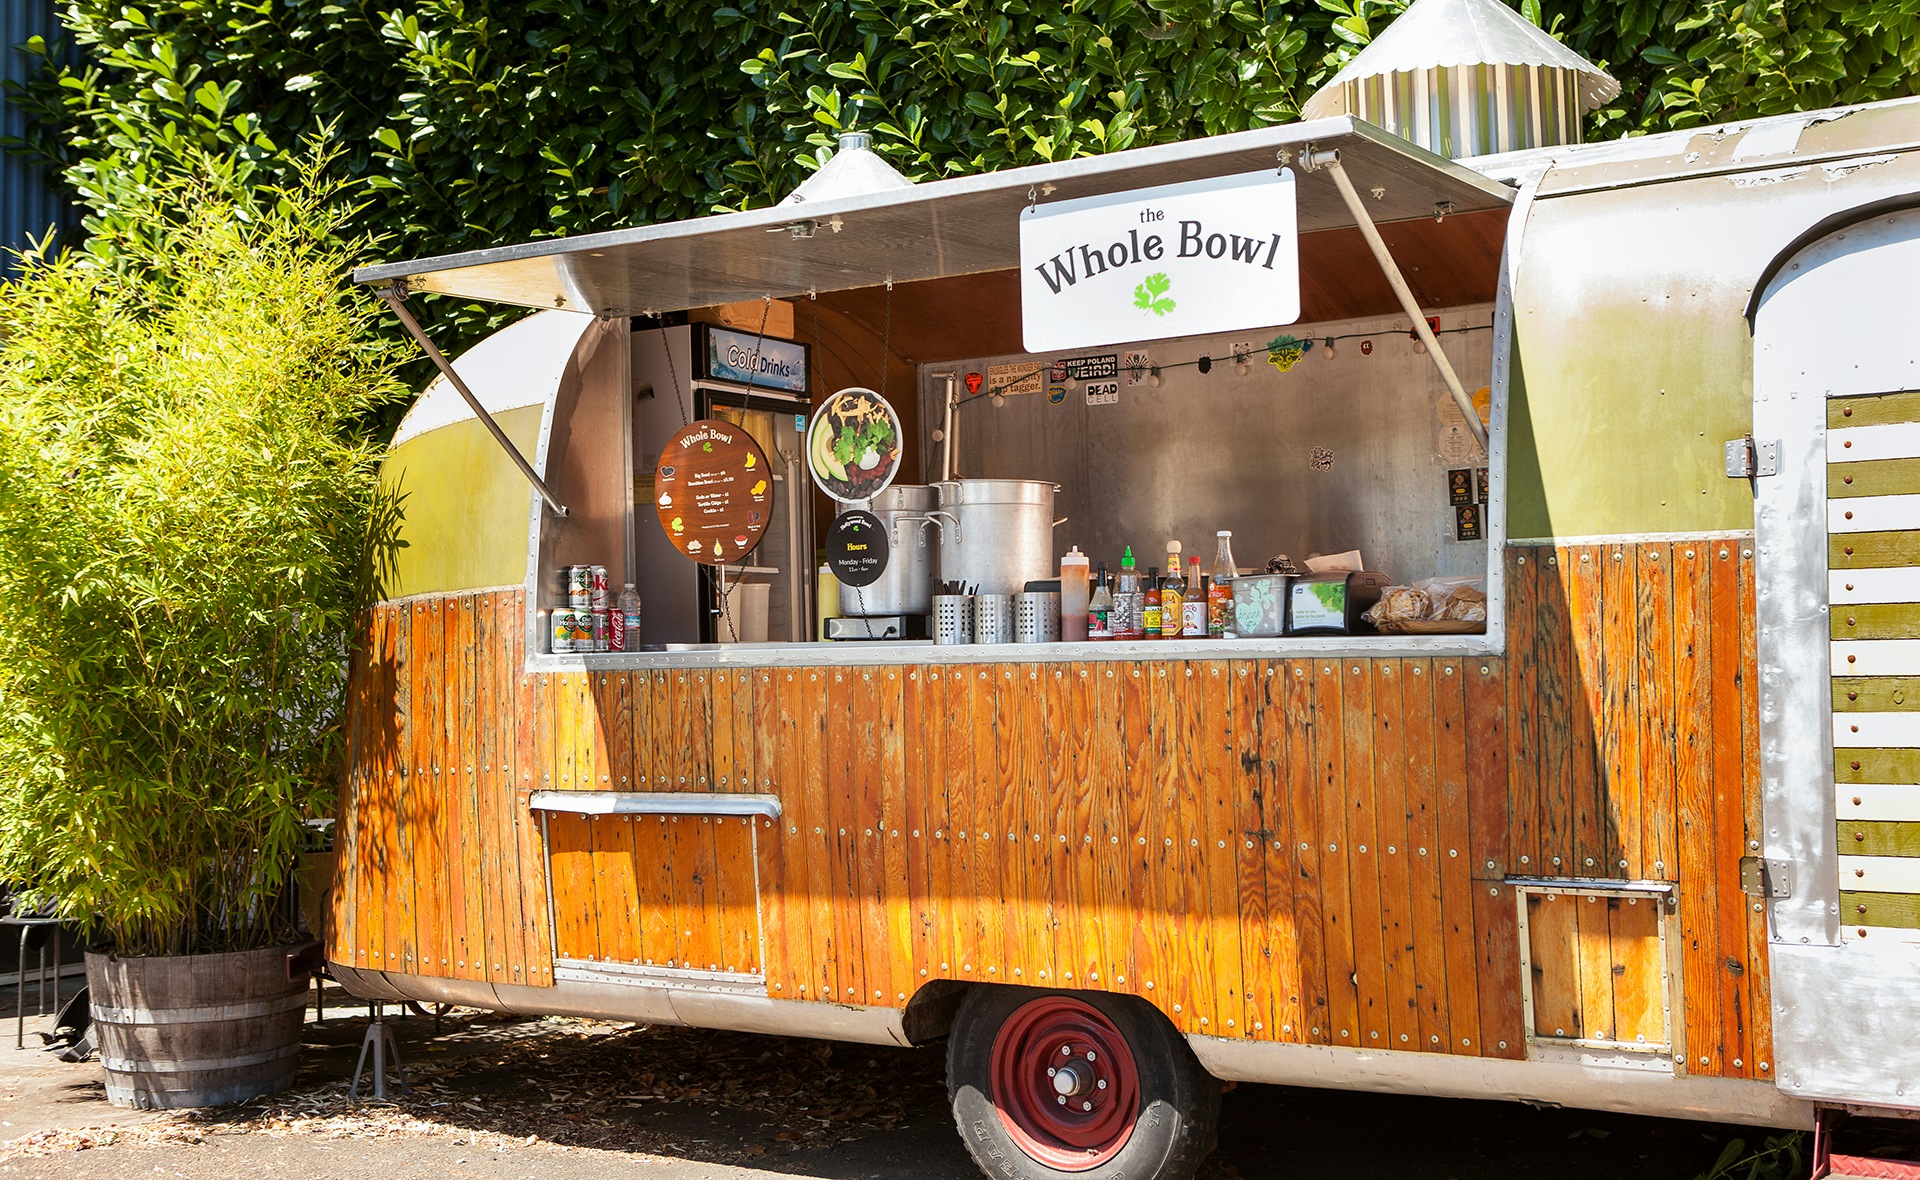 A landscape photograph of a Whole Bowl food truck in Portland, OR.